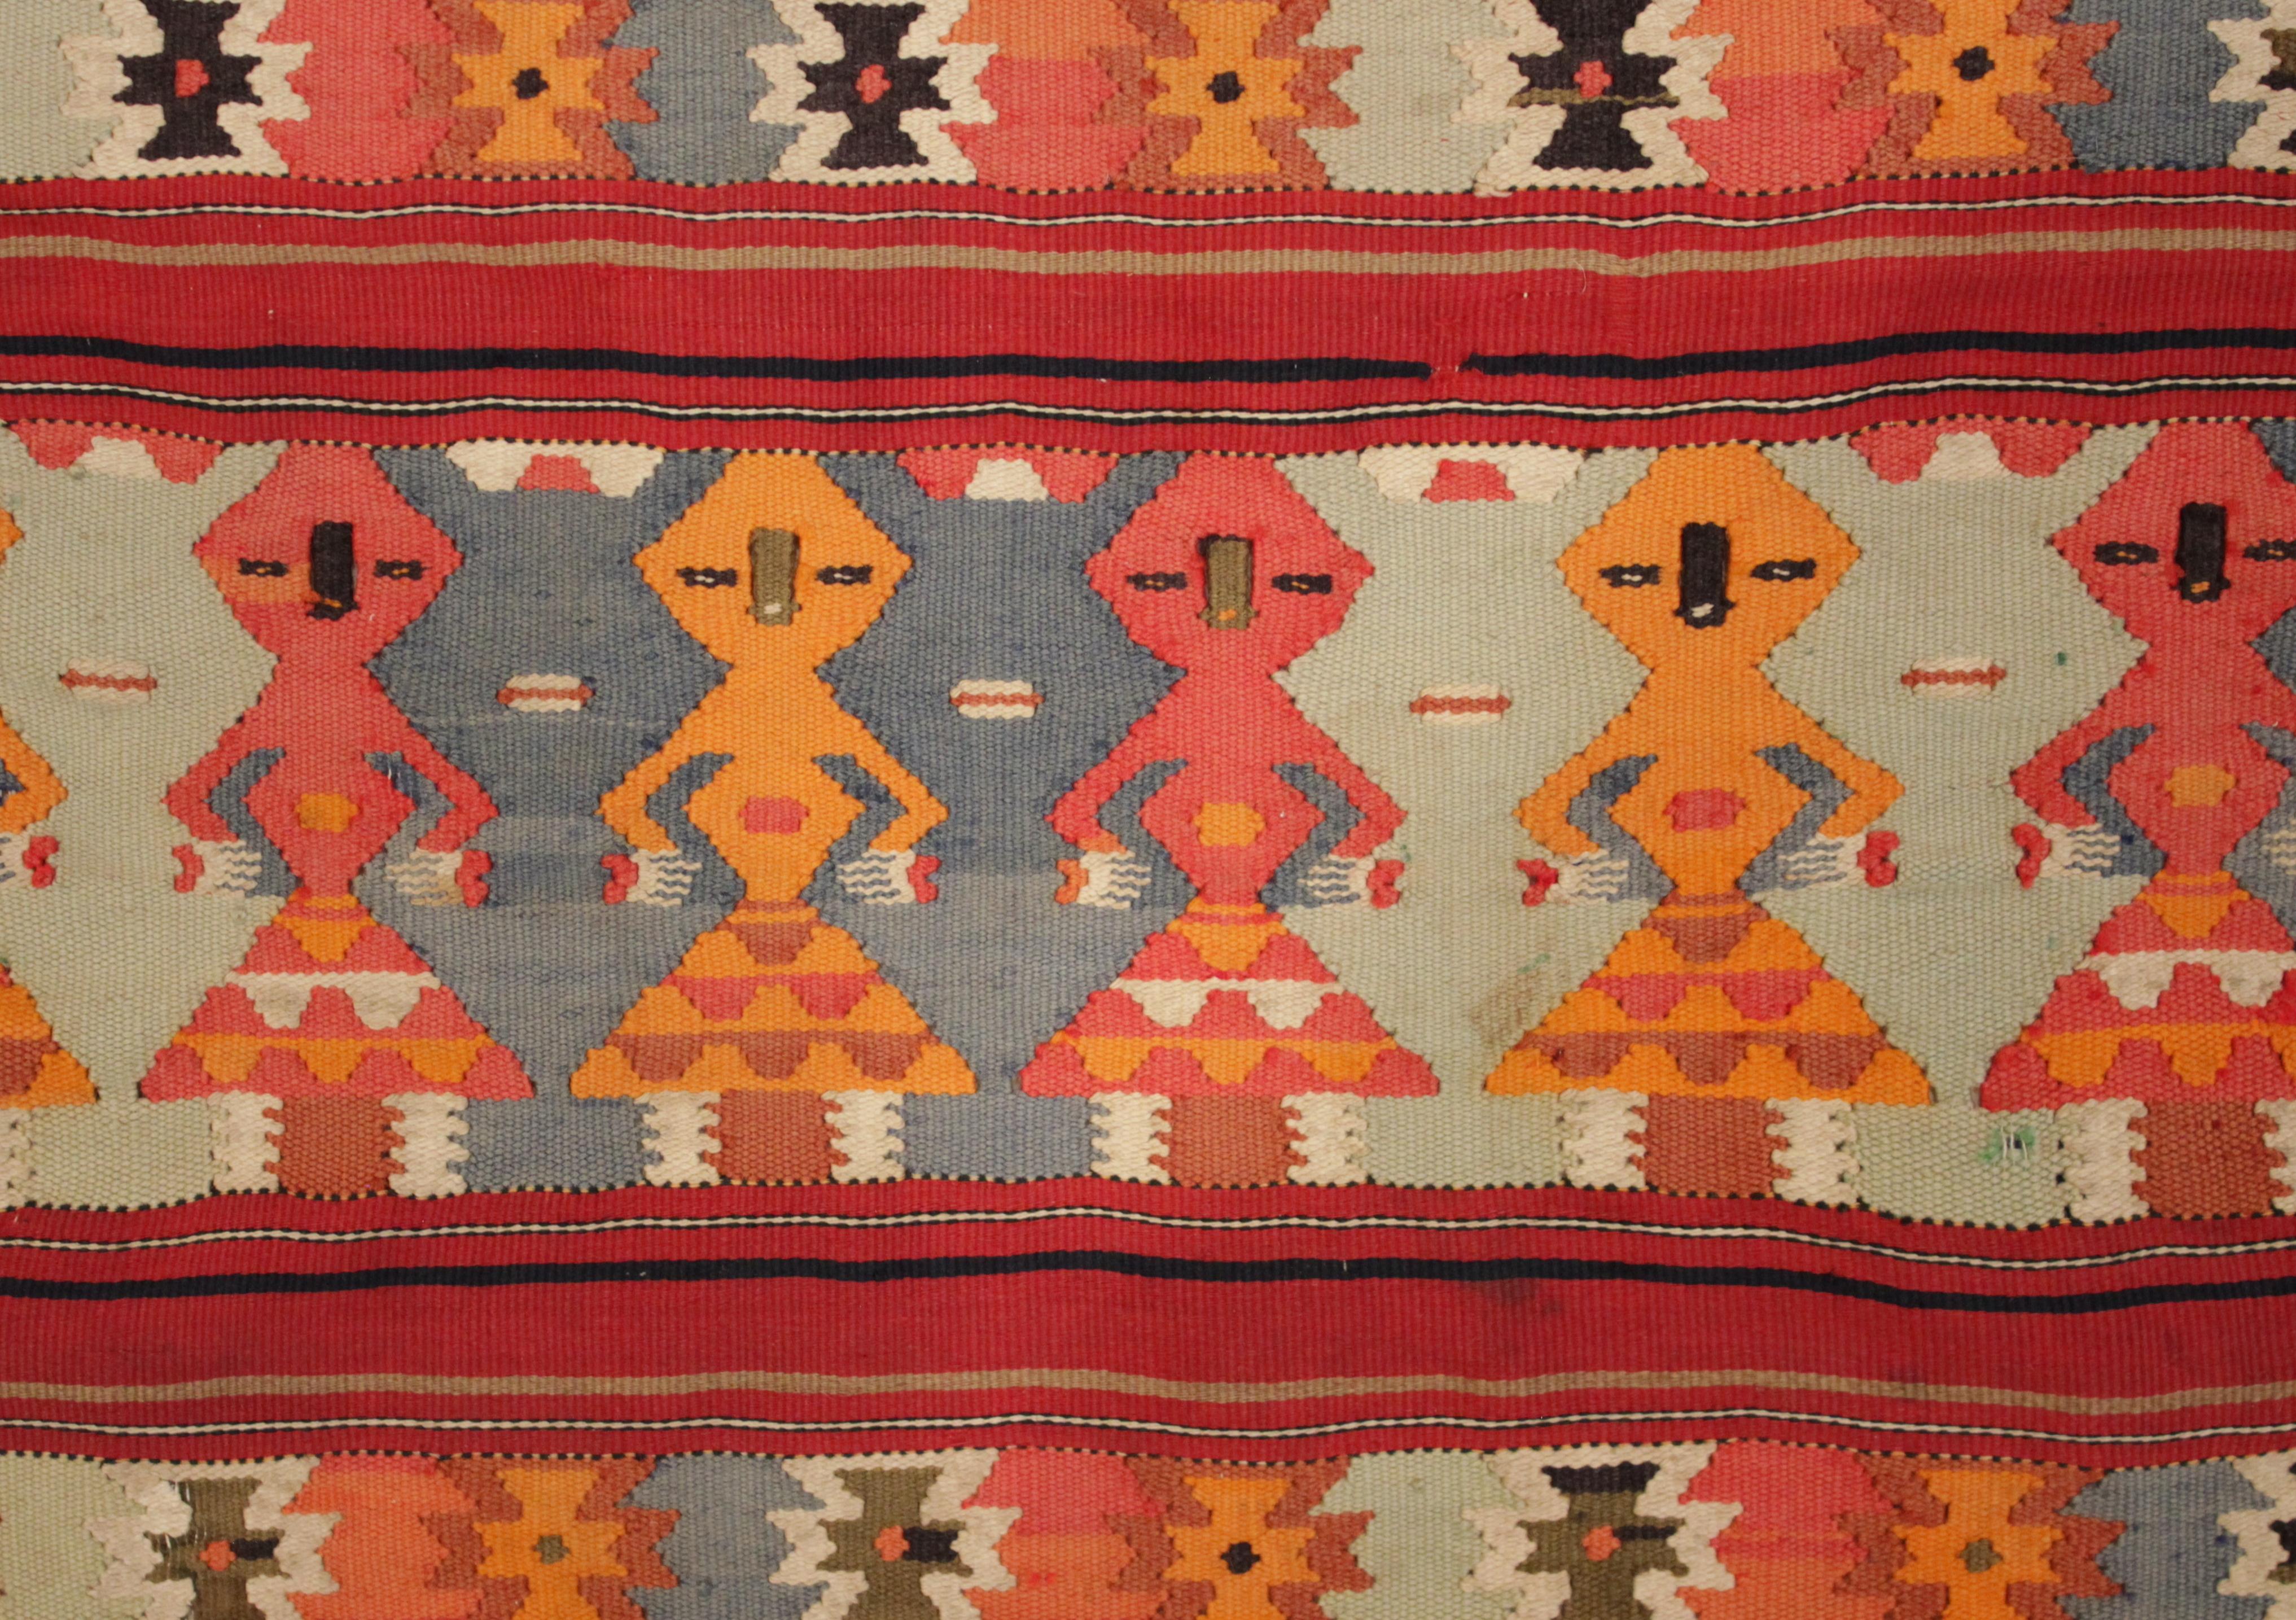 An extremely fine pillow case from the Gafsa region in central Tunisia, exquisitely woven in wool with silk details, decorated by geometric motifs arranged along horizontal compartments. The lower skirt boasts a stunning array of six female figures